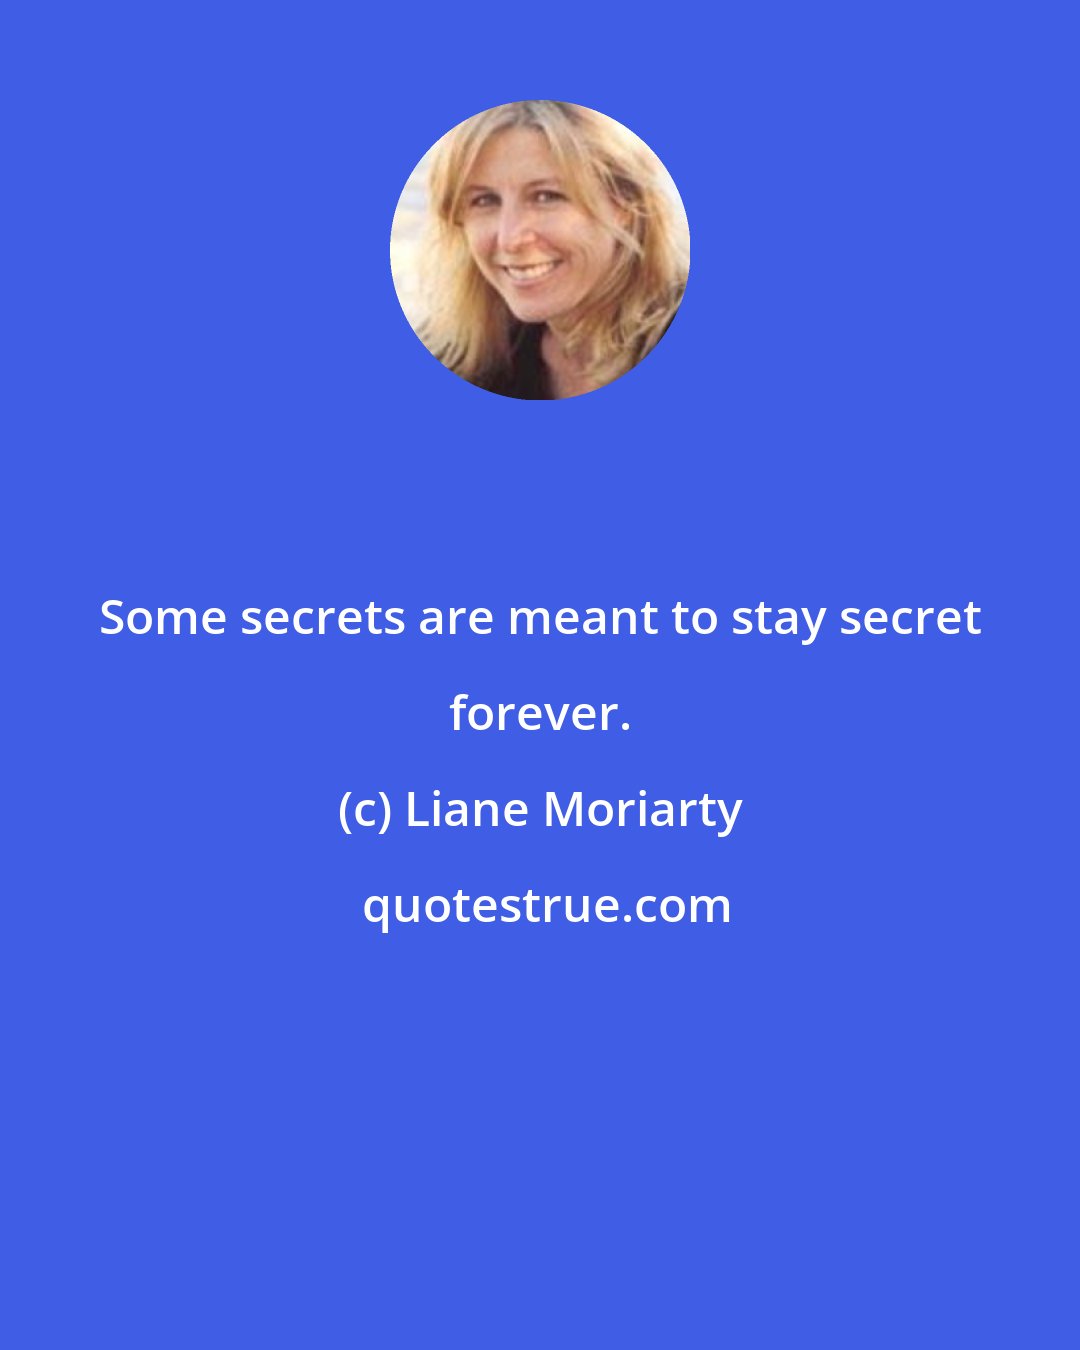 Liane Moriarty: Some secrets are meant to stay secret forever.